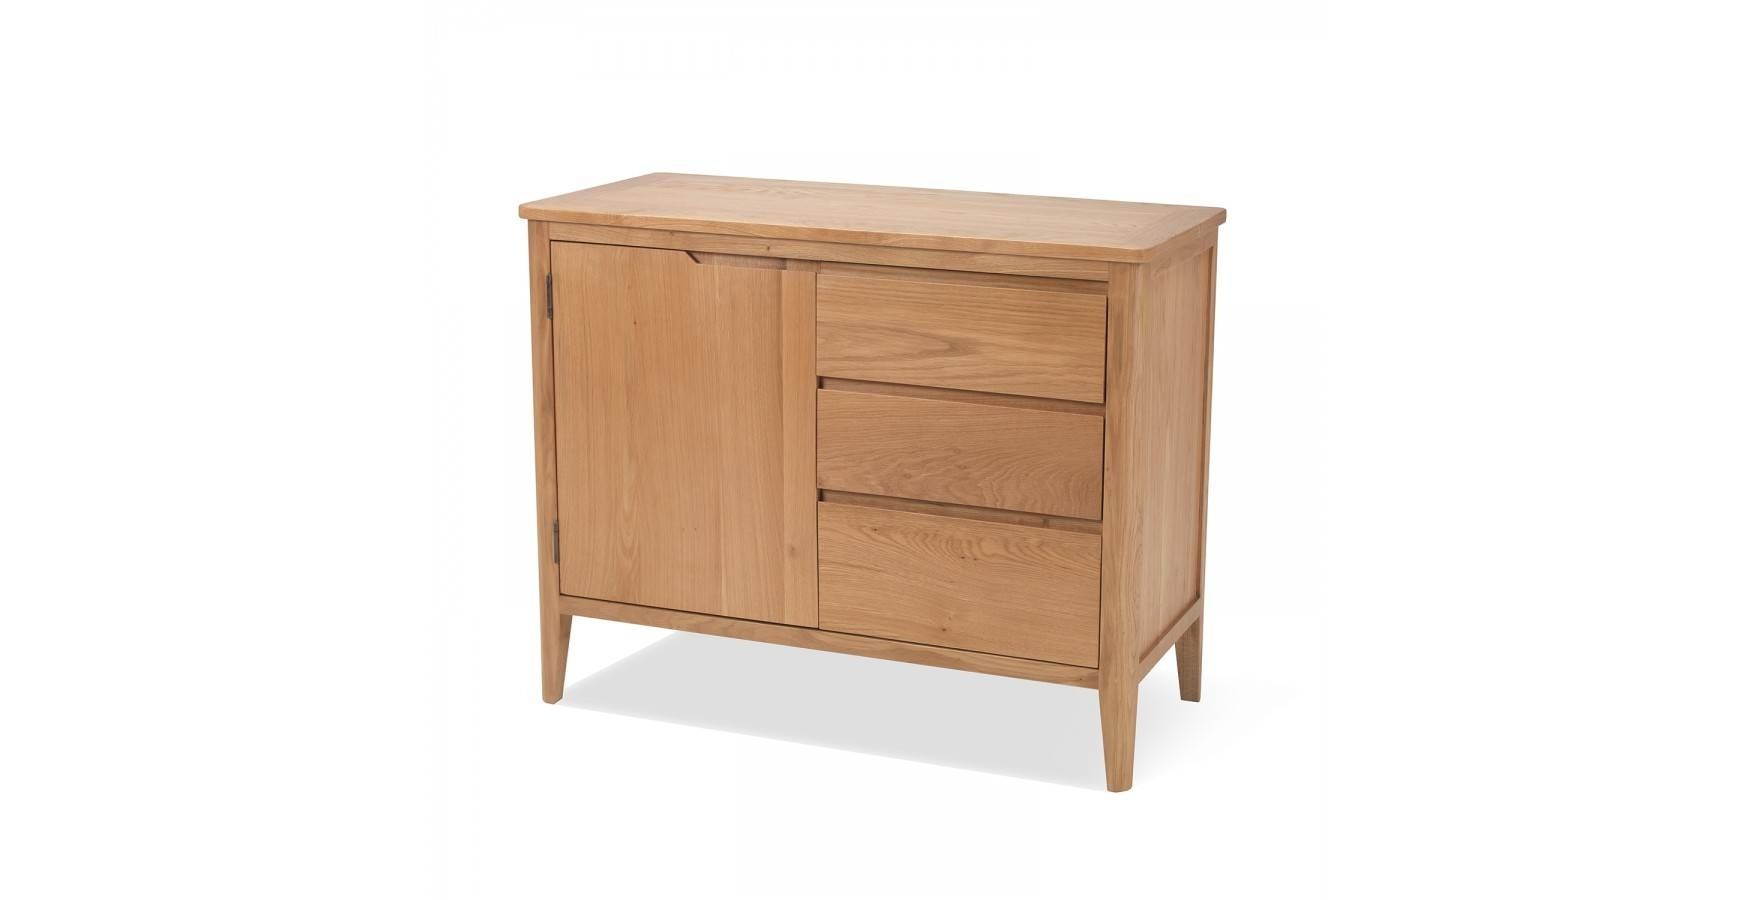 Cadley Oak Small Sideboard With Drawers – Lifestyle Furniture Uk With Small Sideboard With Drawers (View 2 of 20)